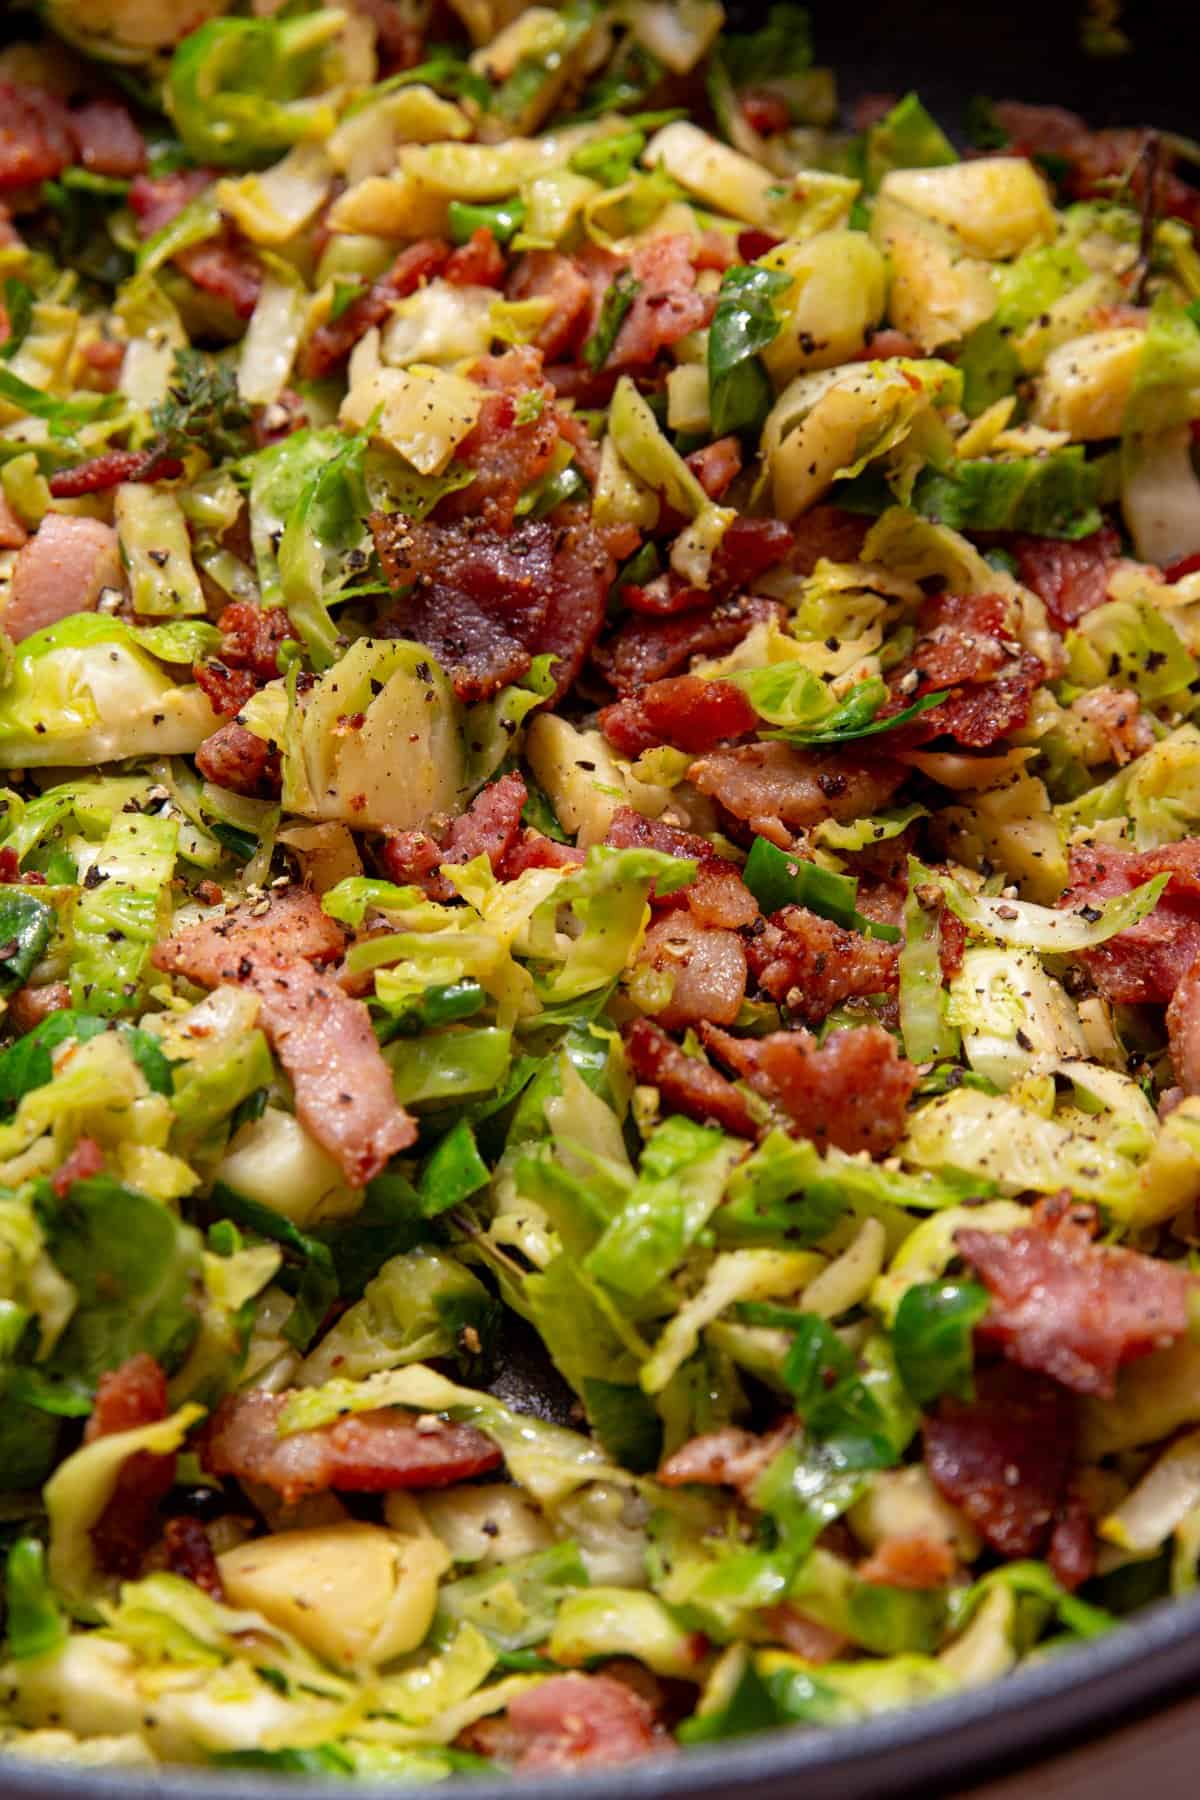 Sliced and cooked Brussel sprouts with browned bacon pieces with pepper added..